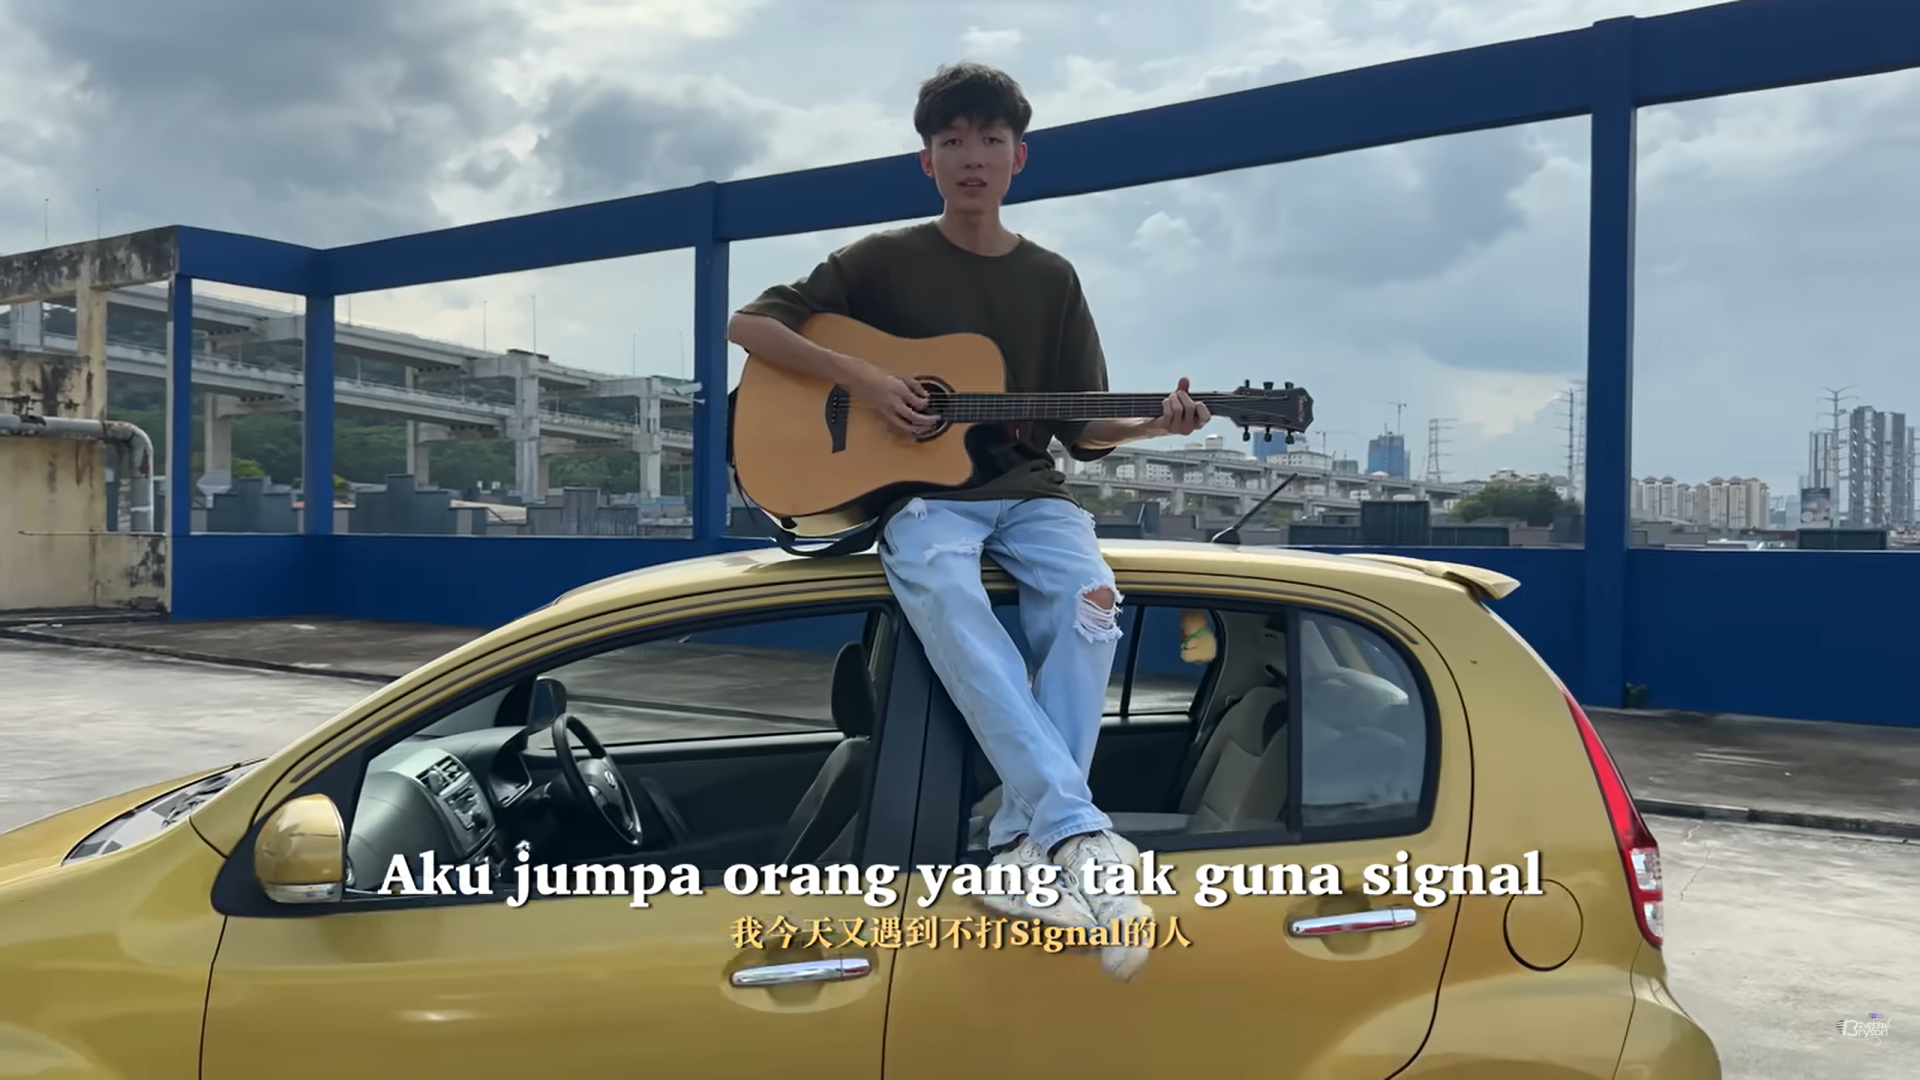 Bryson lew singing a song about m'sian drivers who don't use the signal lights